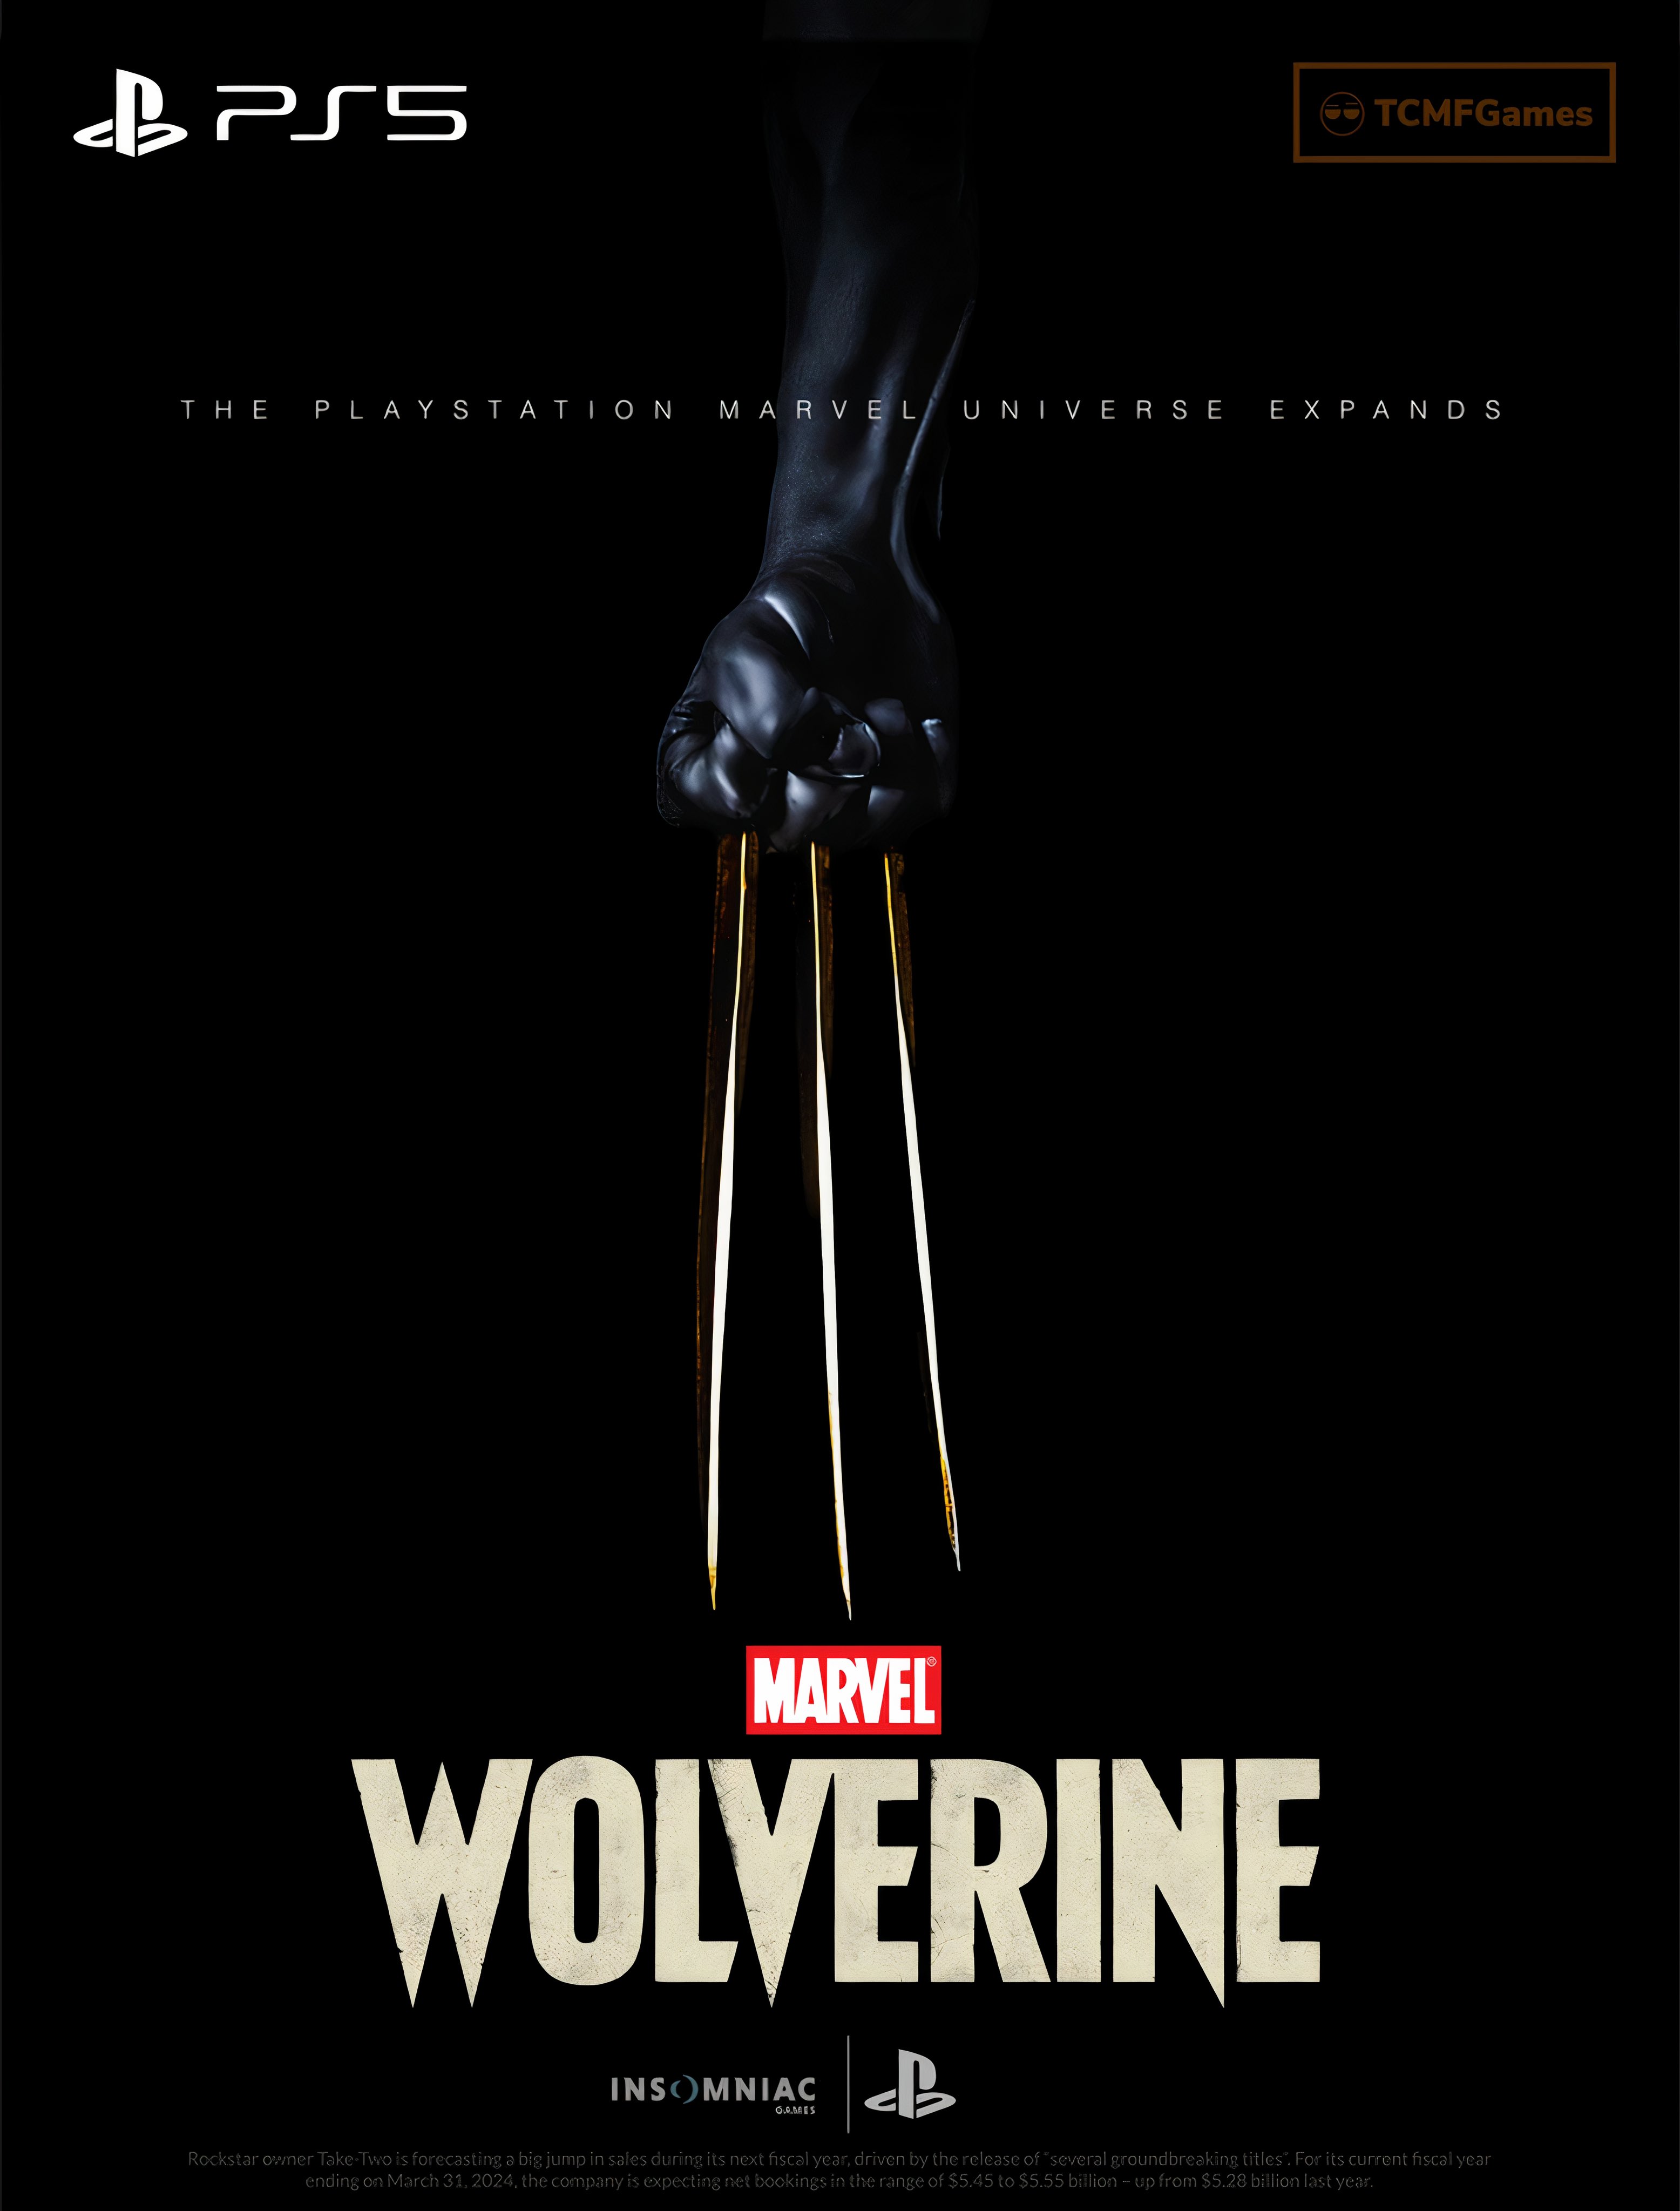 TCMFGames on X: Wolverine teaser at the PlayStation Showcase would be wild  👀 🐺 - PS5